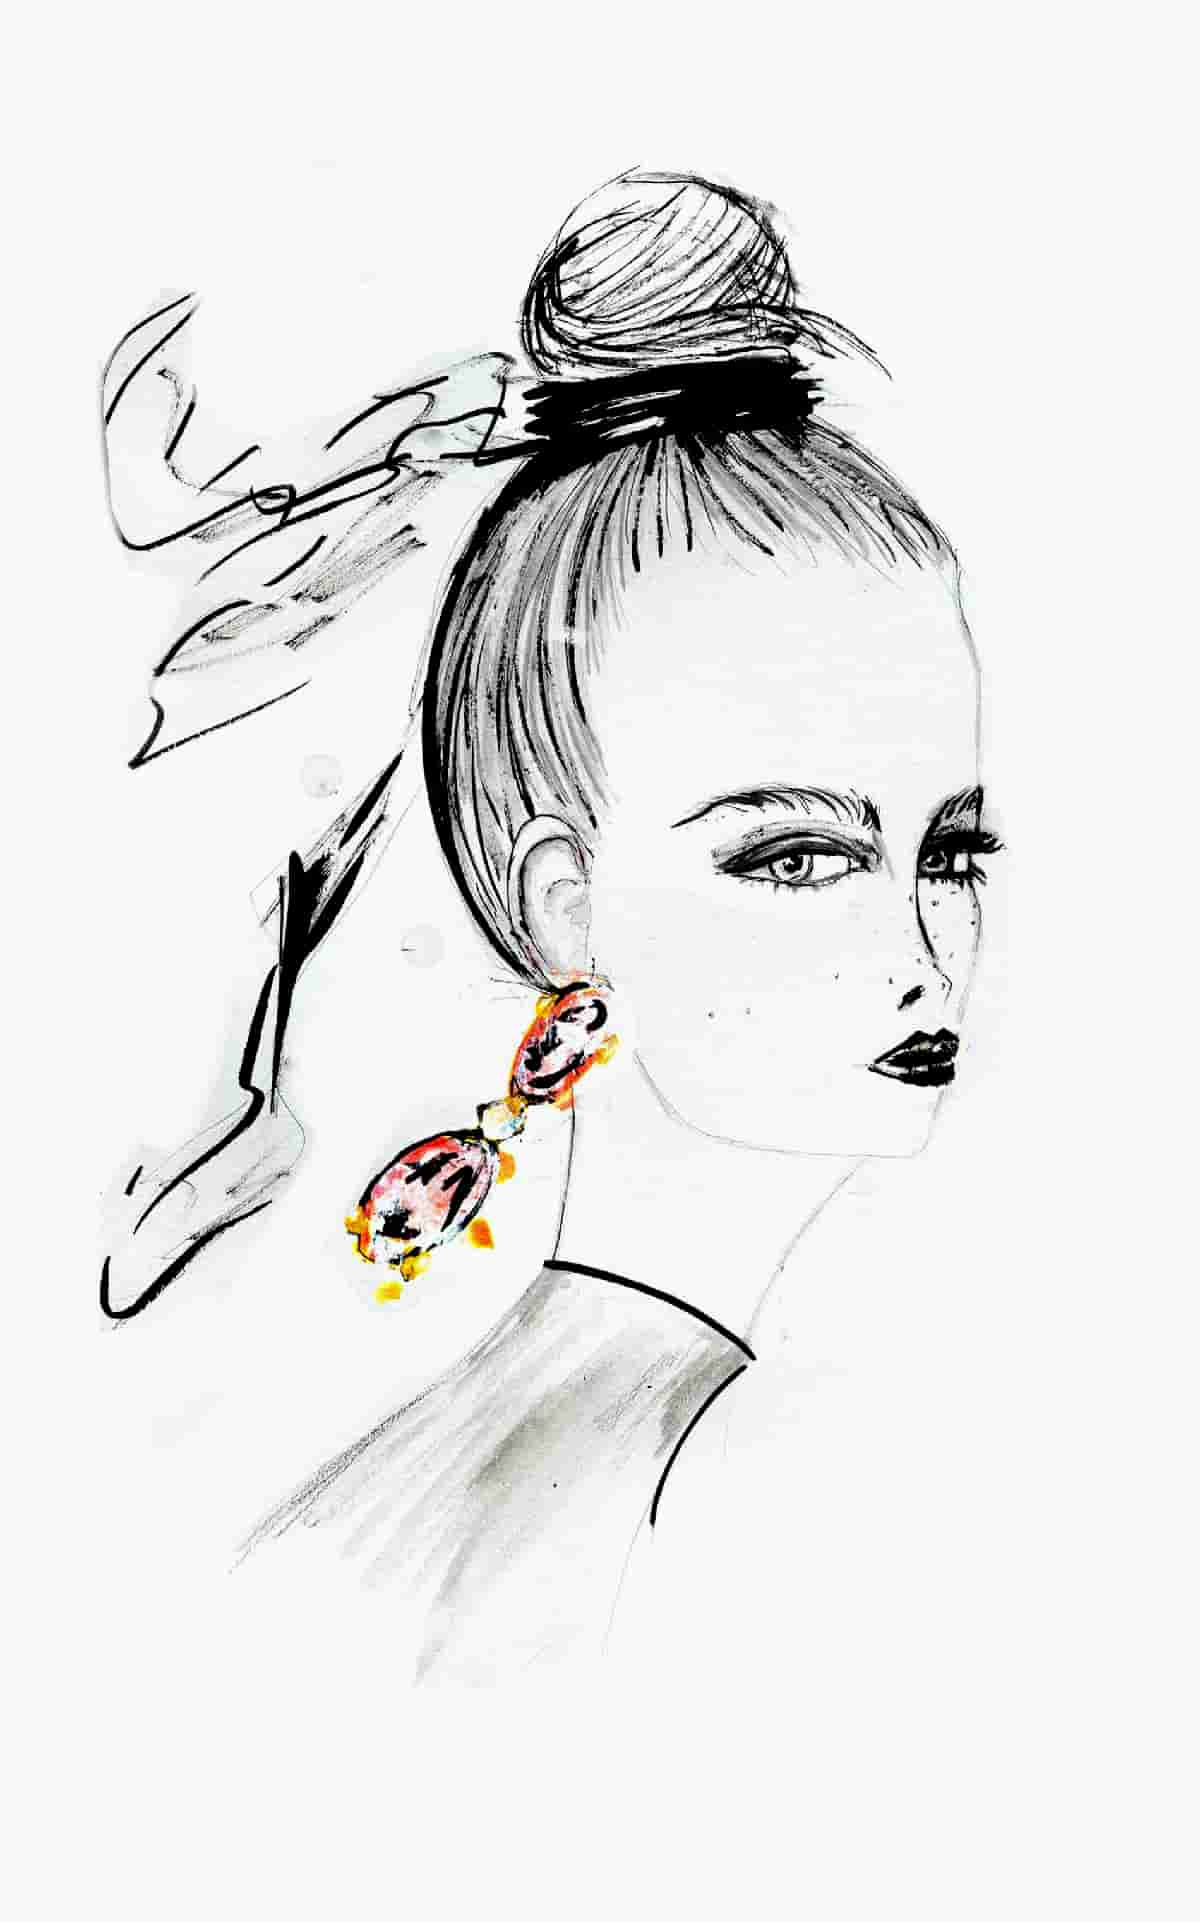 The Create Fashion Illustrations edited Draw Your Own Sketch in a Few Steps